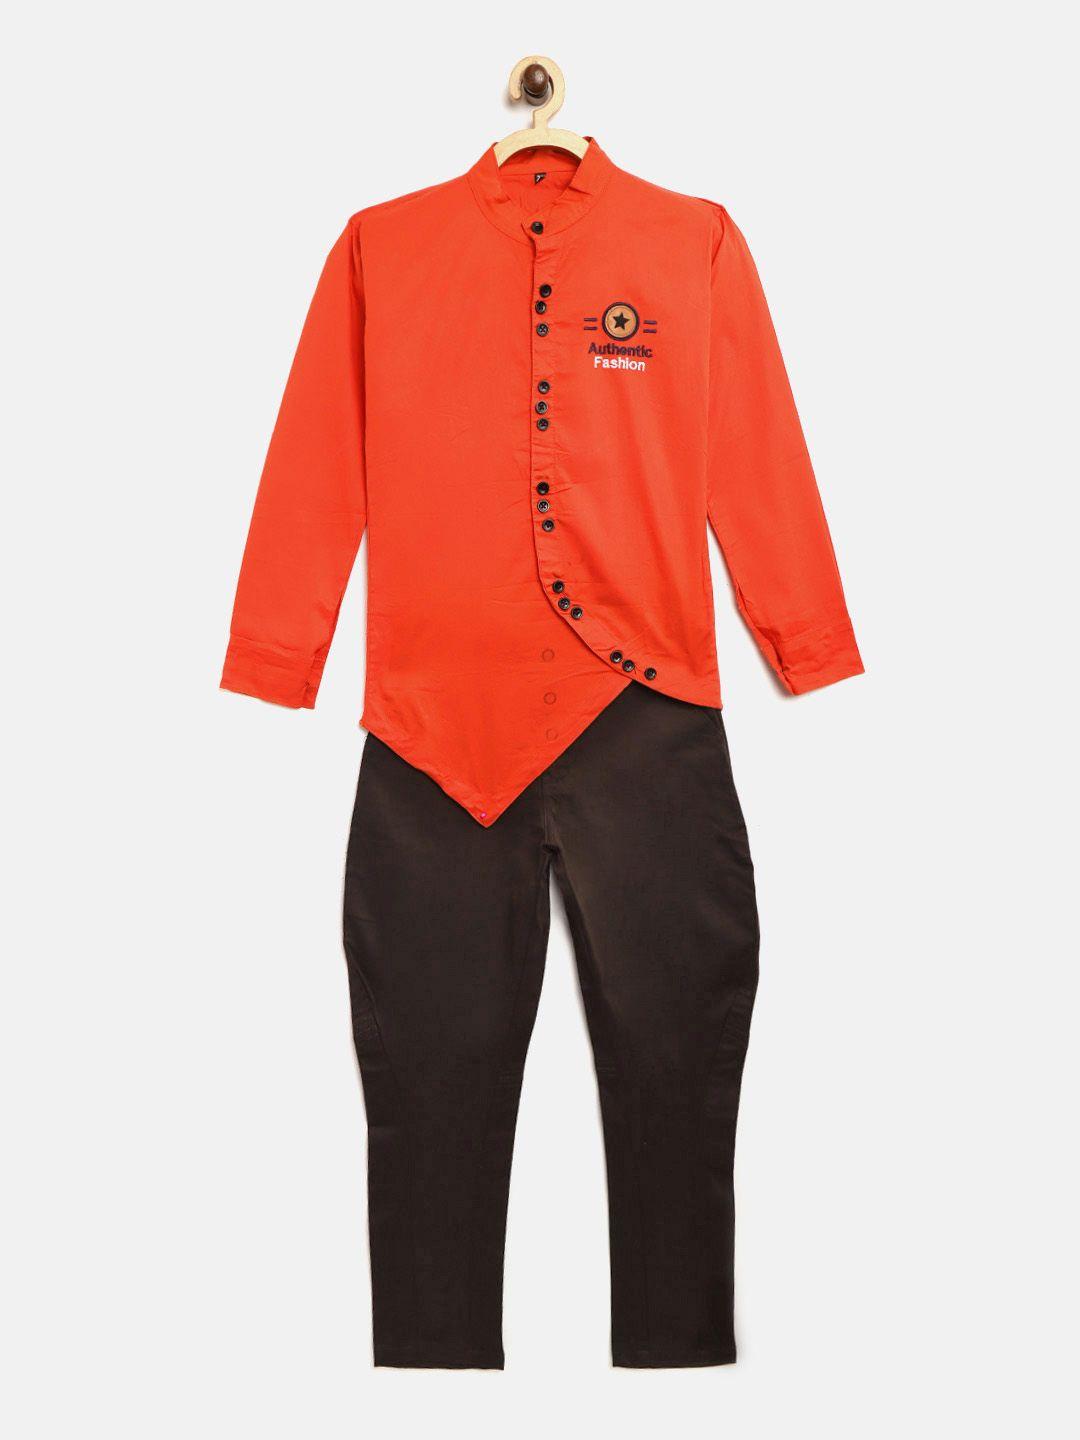 ad & av boys coral red & coffee brown solid asymmetric shirt with trousers